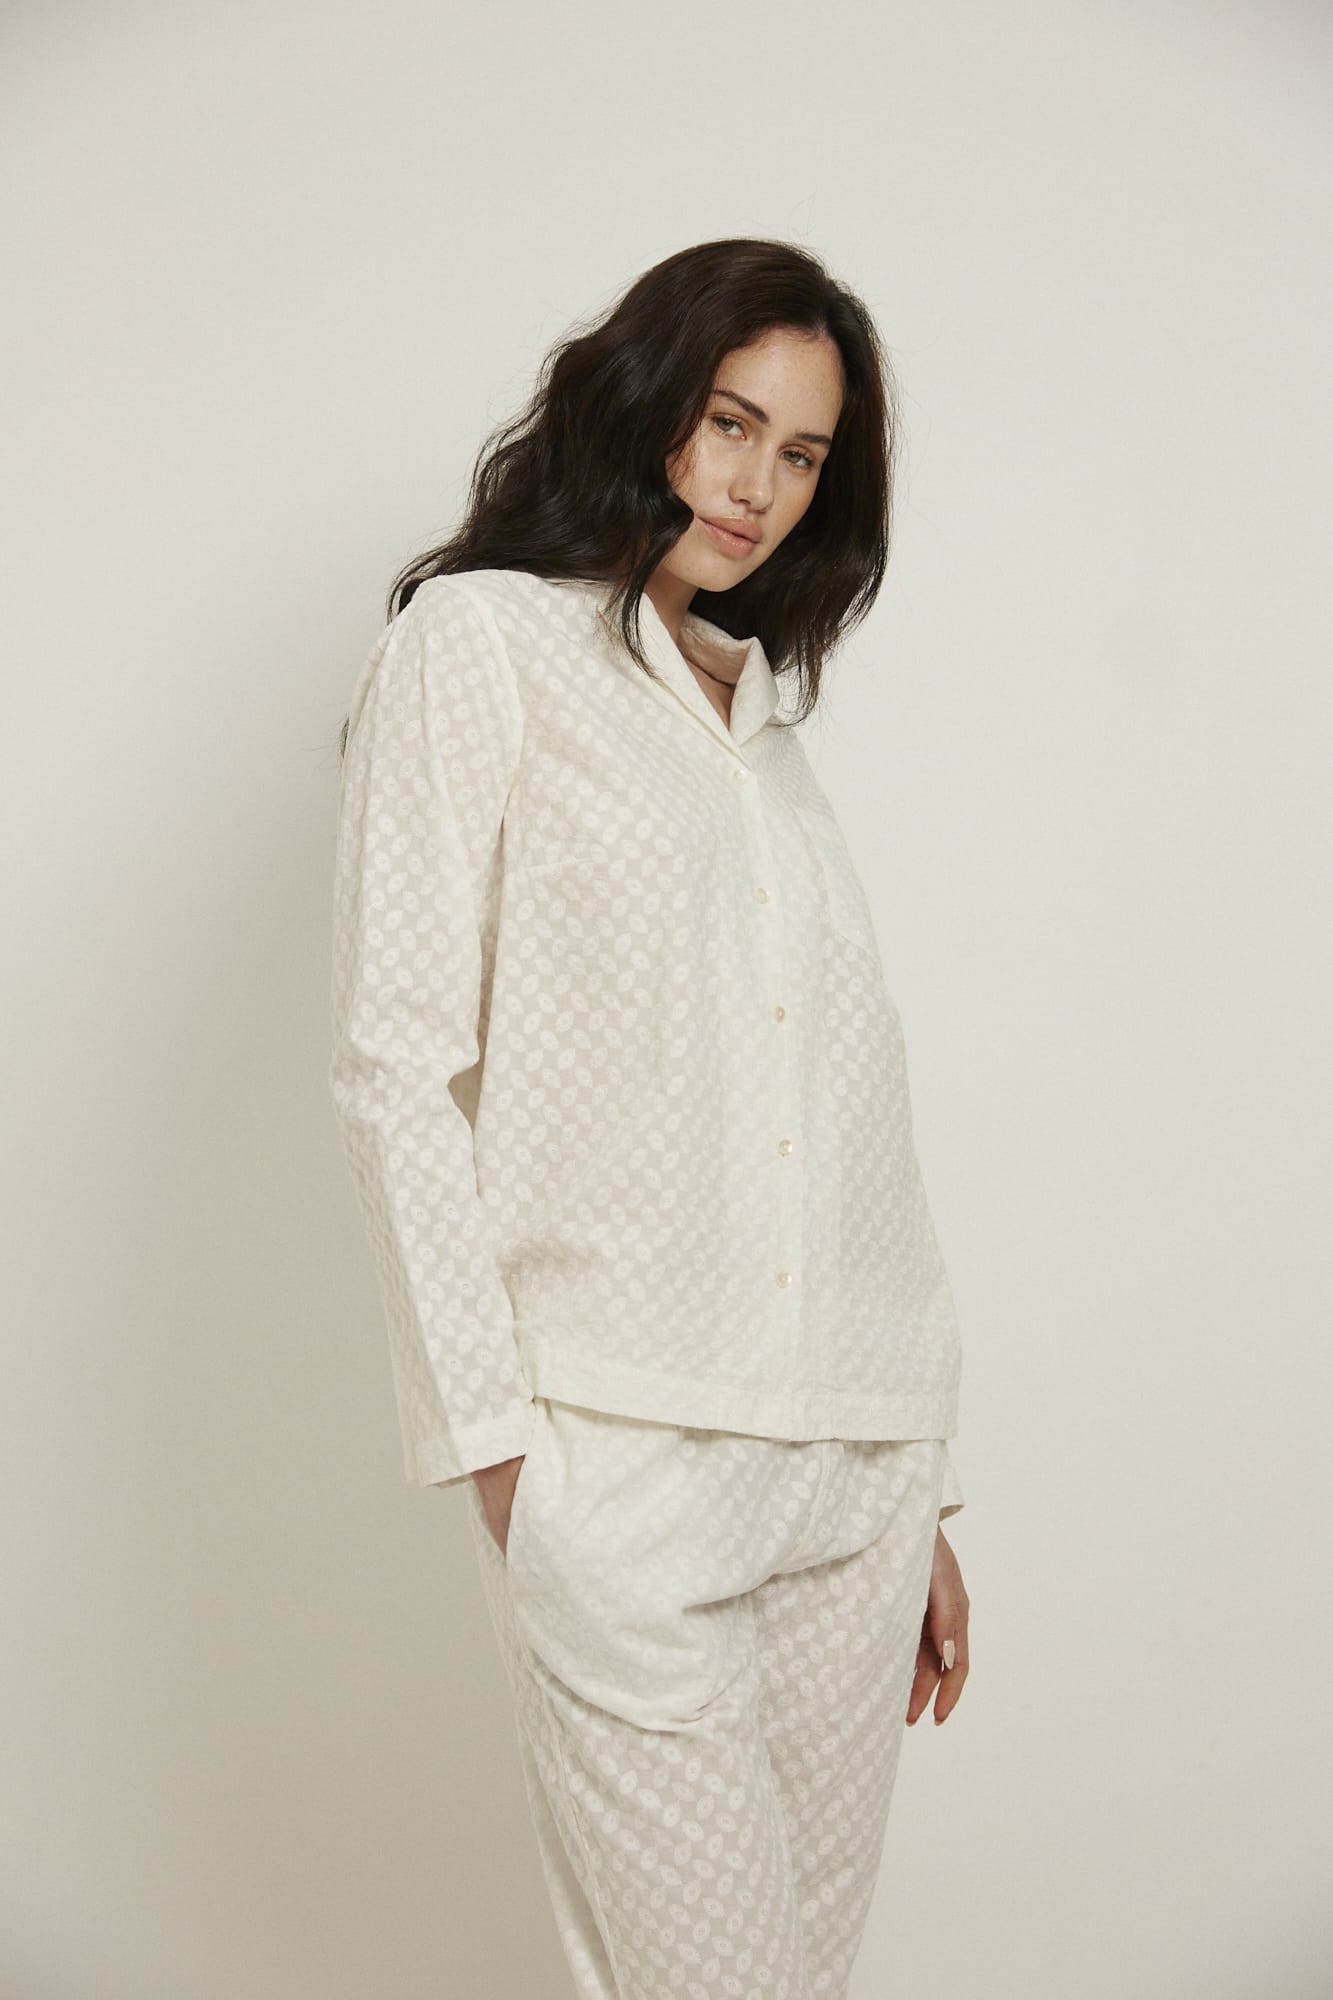 Women’s pyjama set including a long sleeve shirt and long sleeve pants. Made from 100% organic cotton, in white colour featuring delicate all over embroidery. The shirt has natural shell buttons, a front pocket and a back pleat.  The pants feature an elasticated waistband for comfort.  